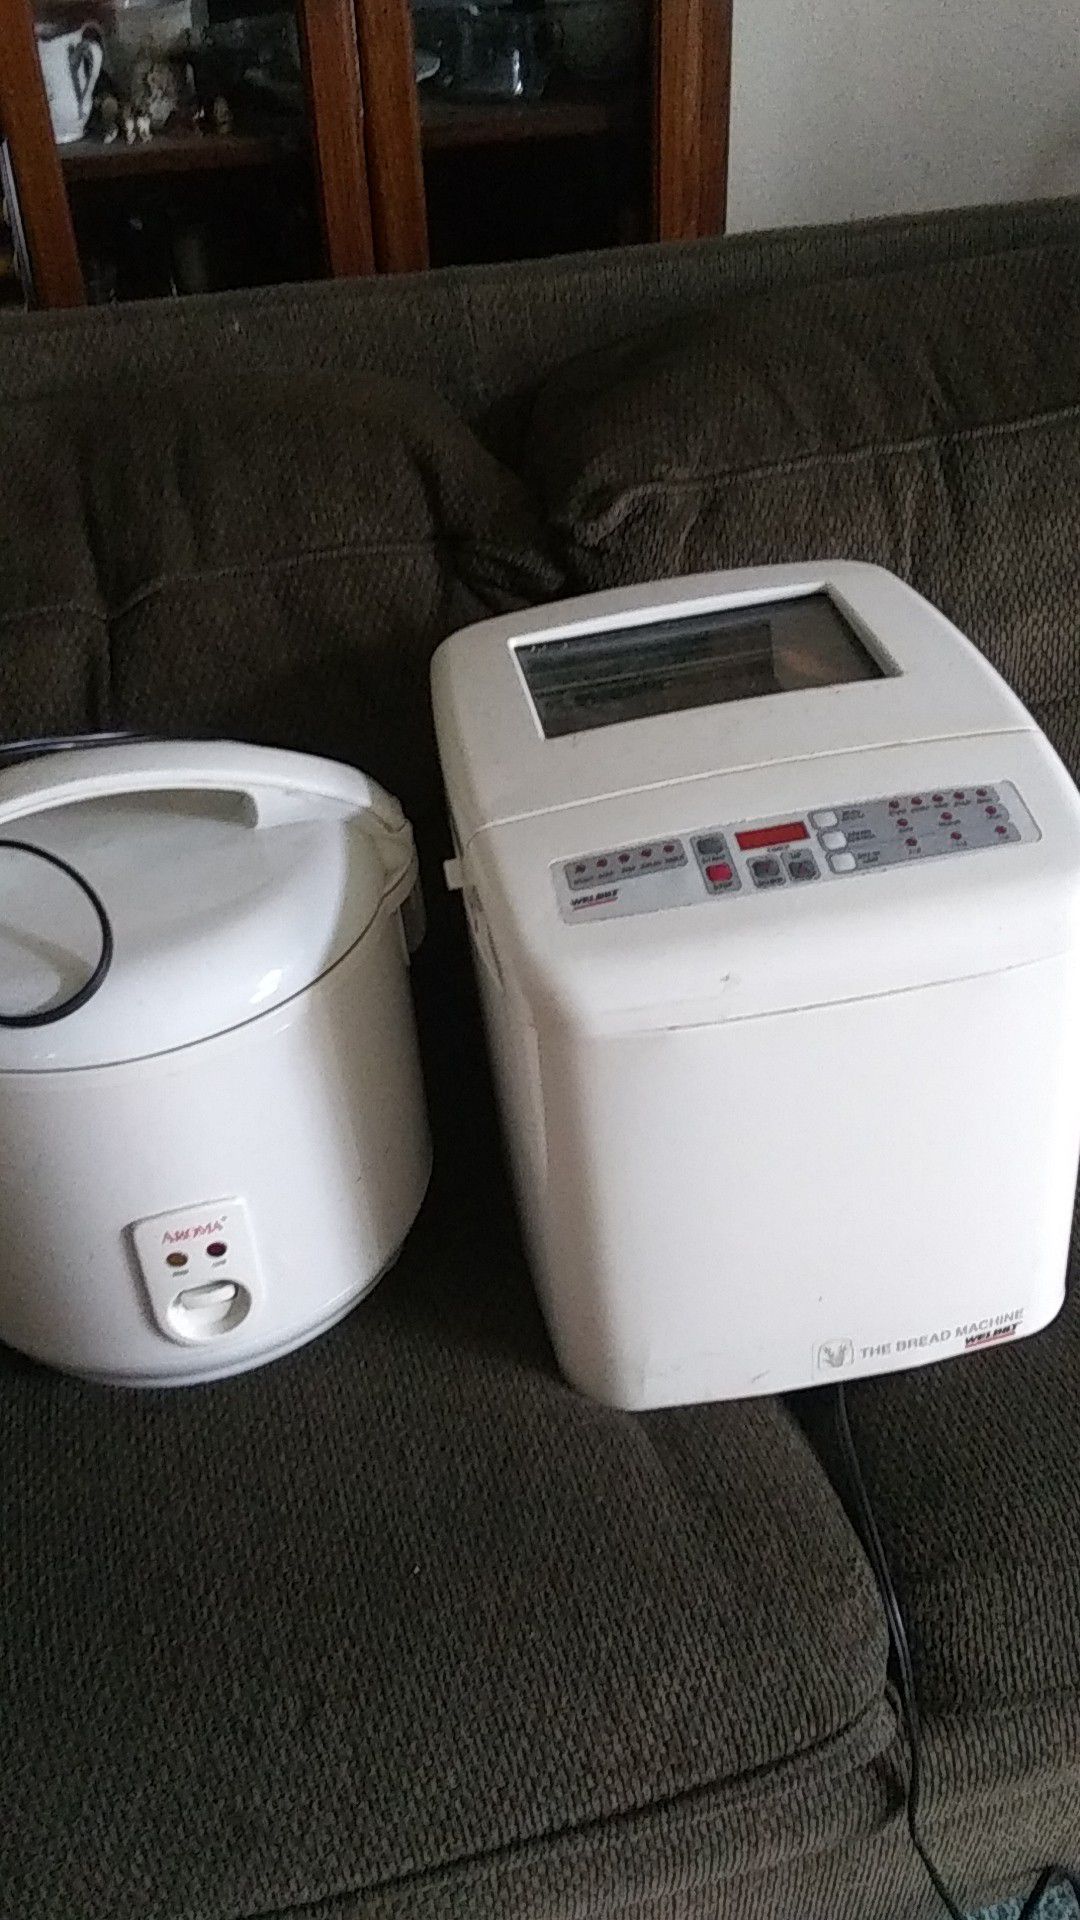 Rice and bread maker